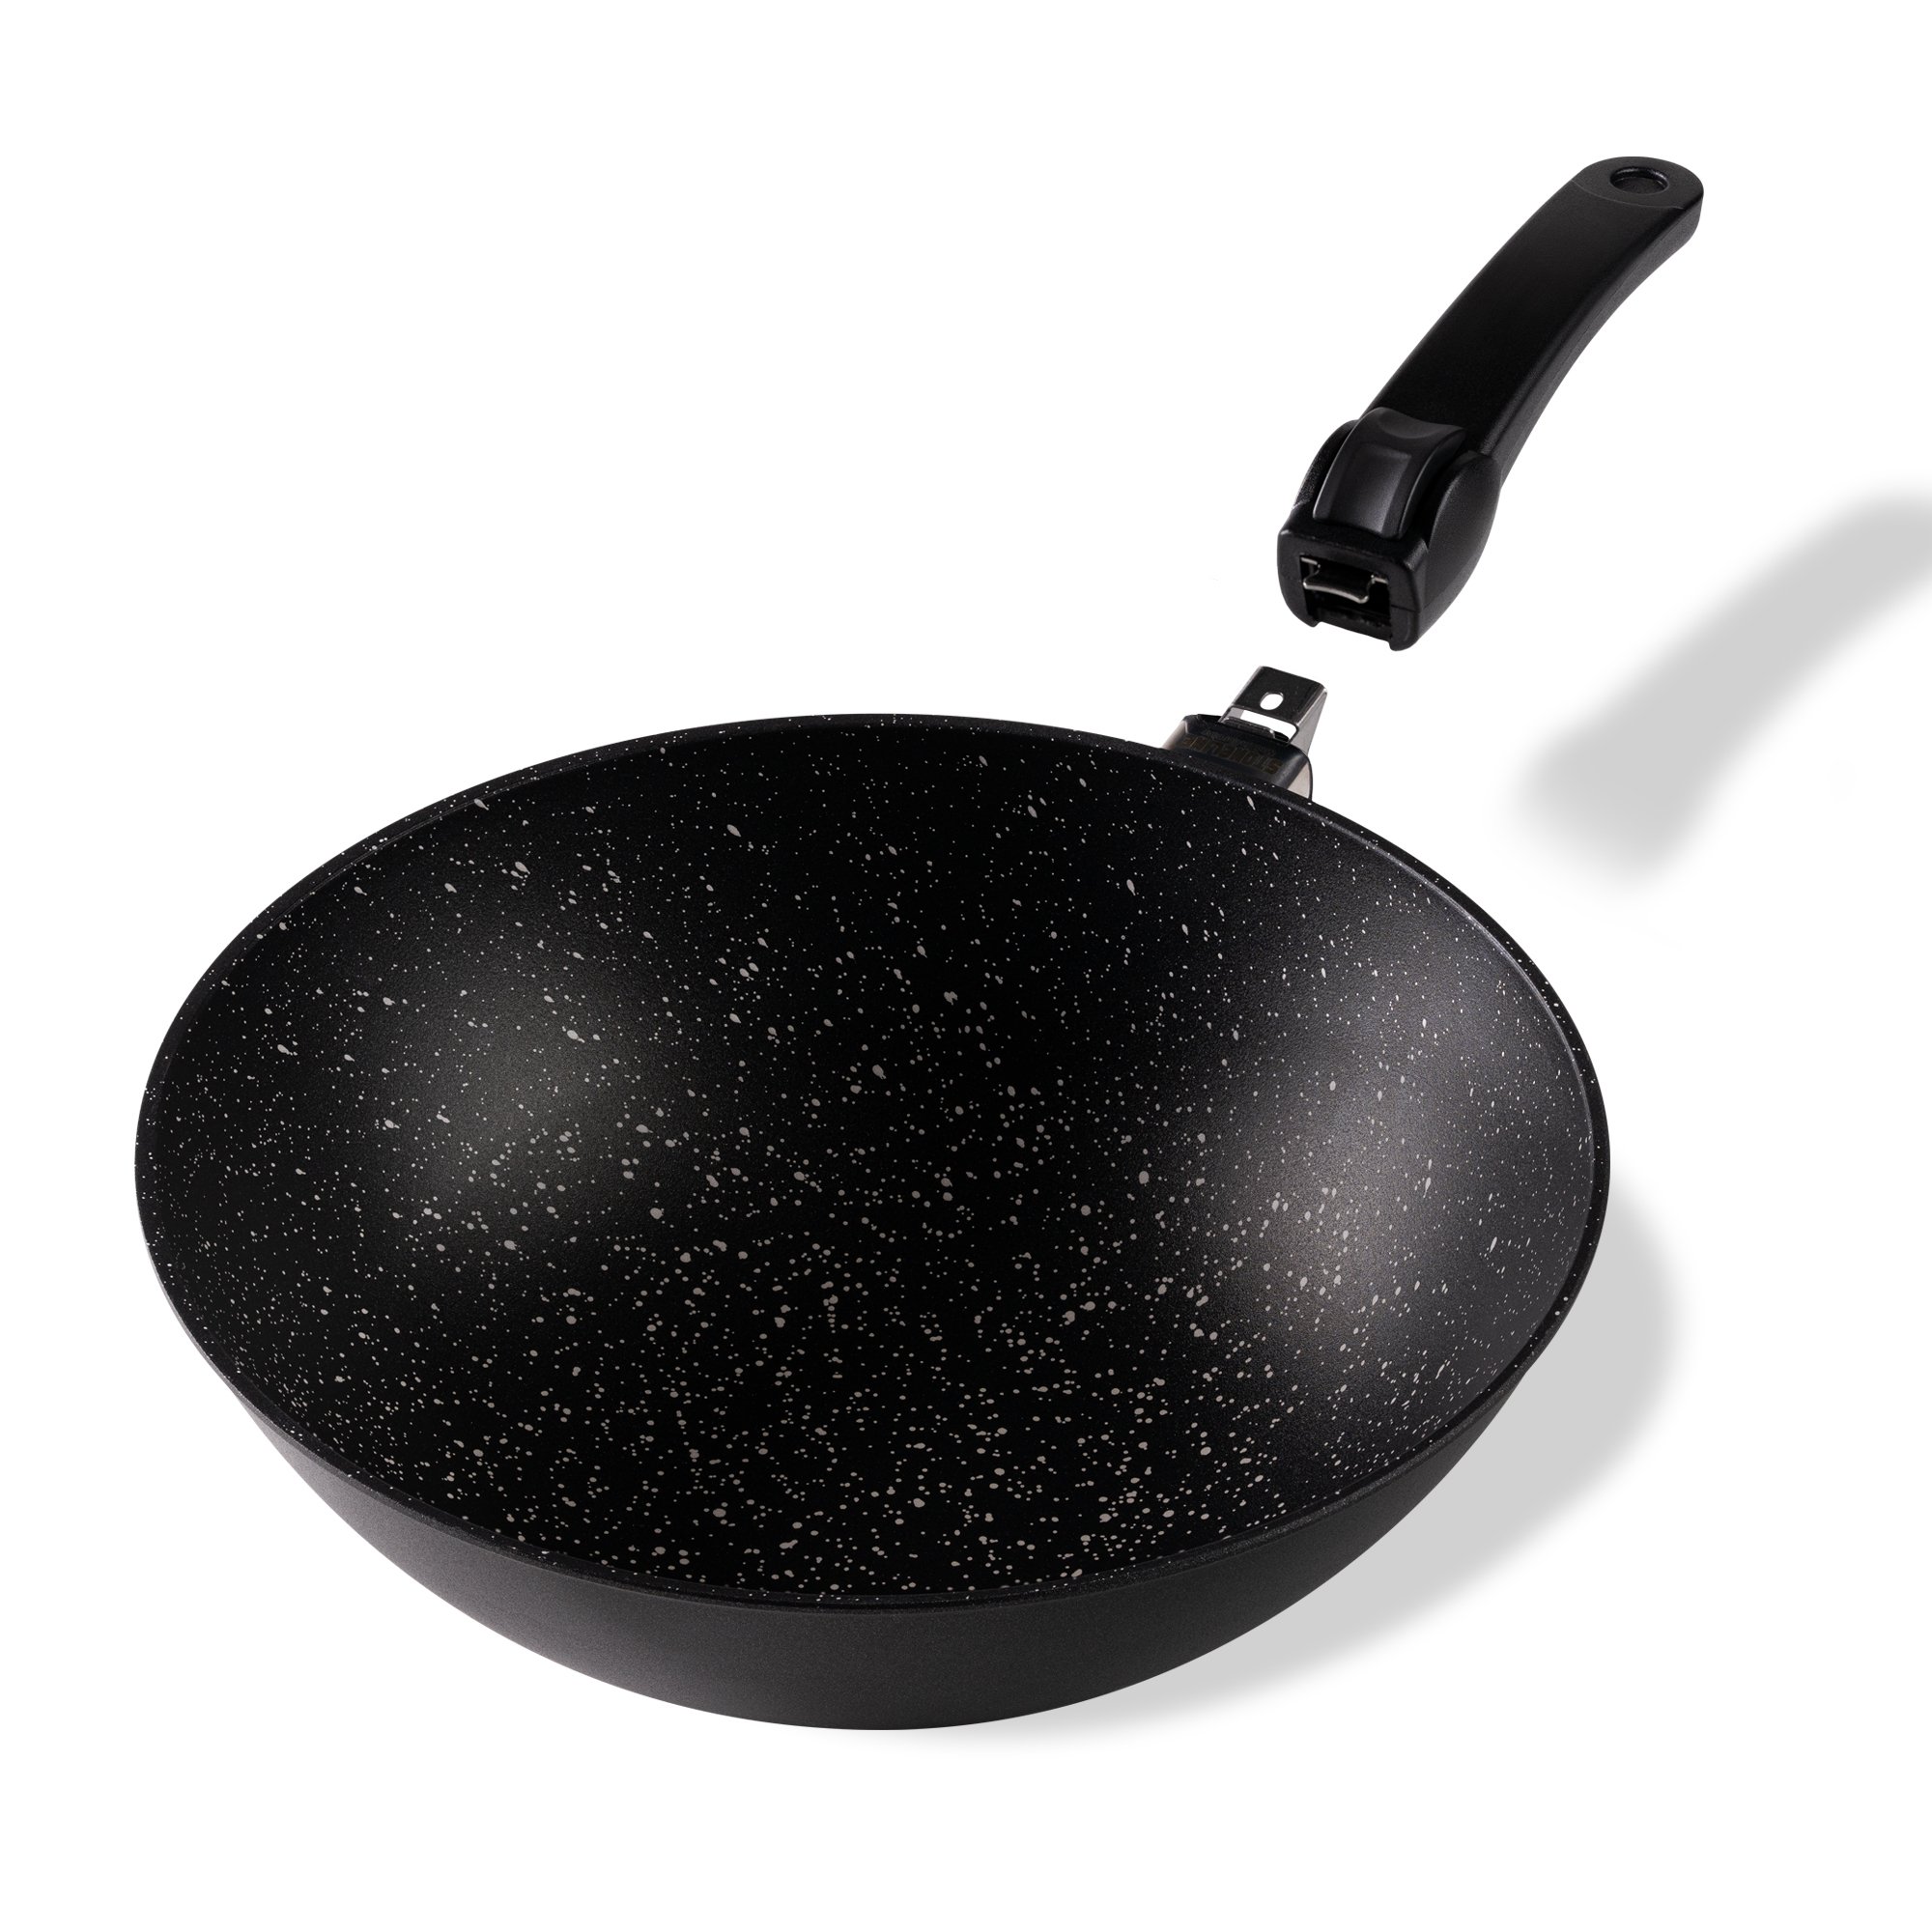 STONELINE® Wok Pan 30 cm, Removable Handle, Cast Non-Stick Pan | Made in Germany